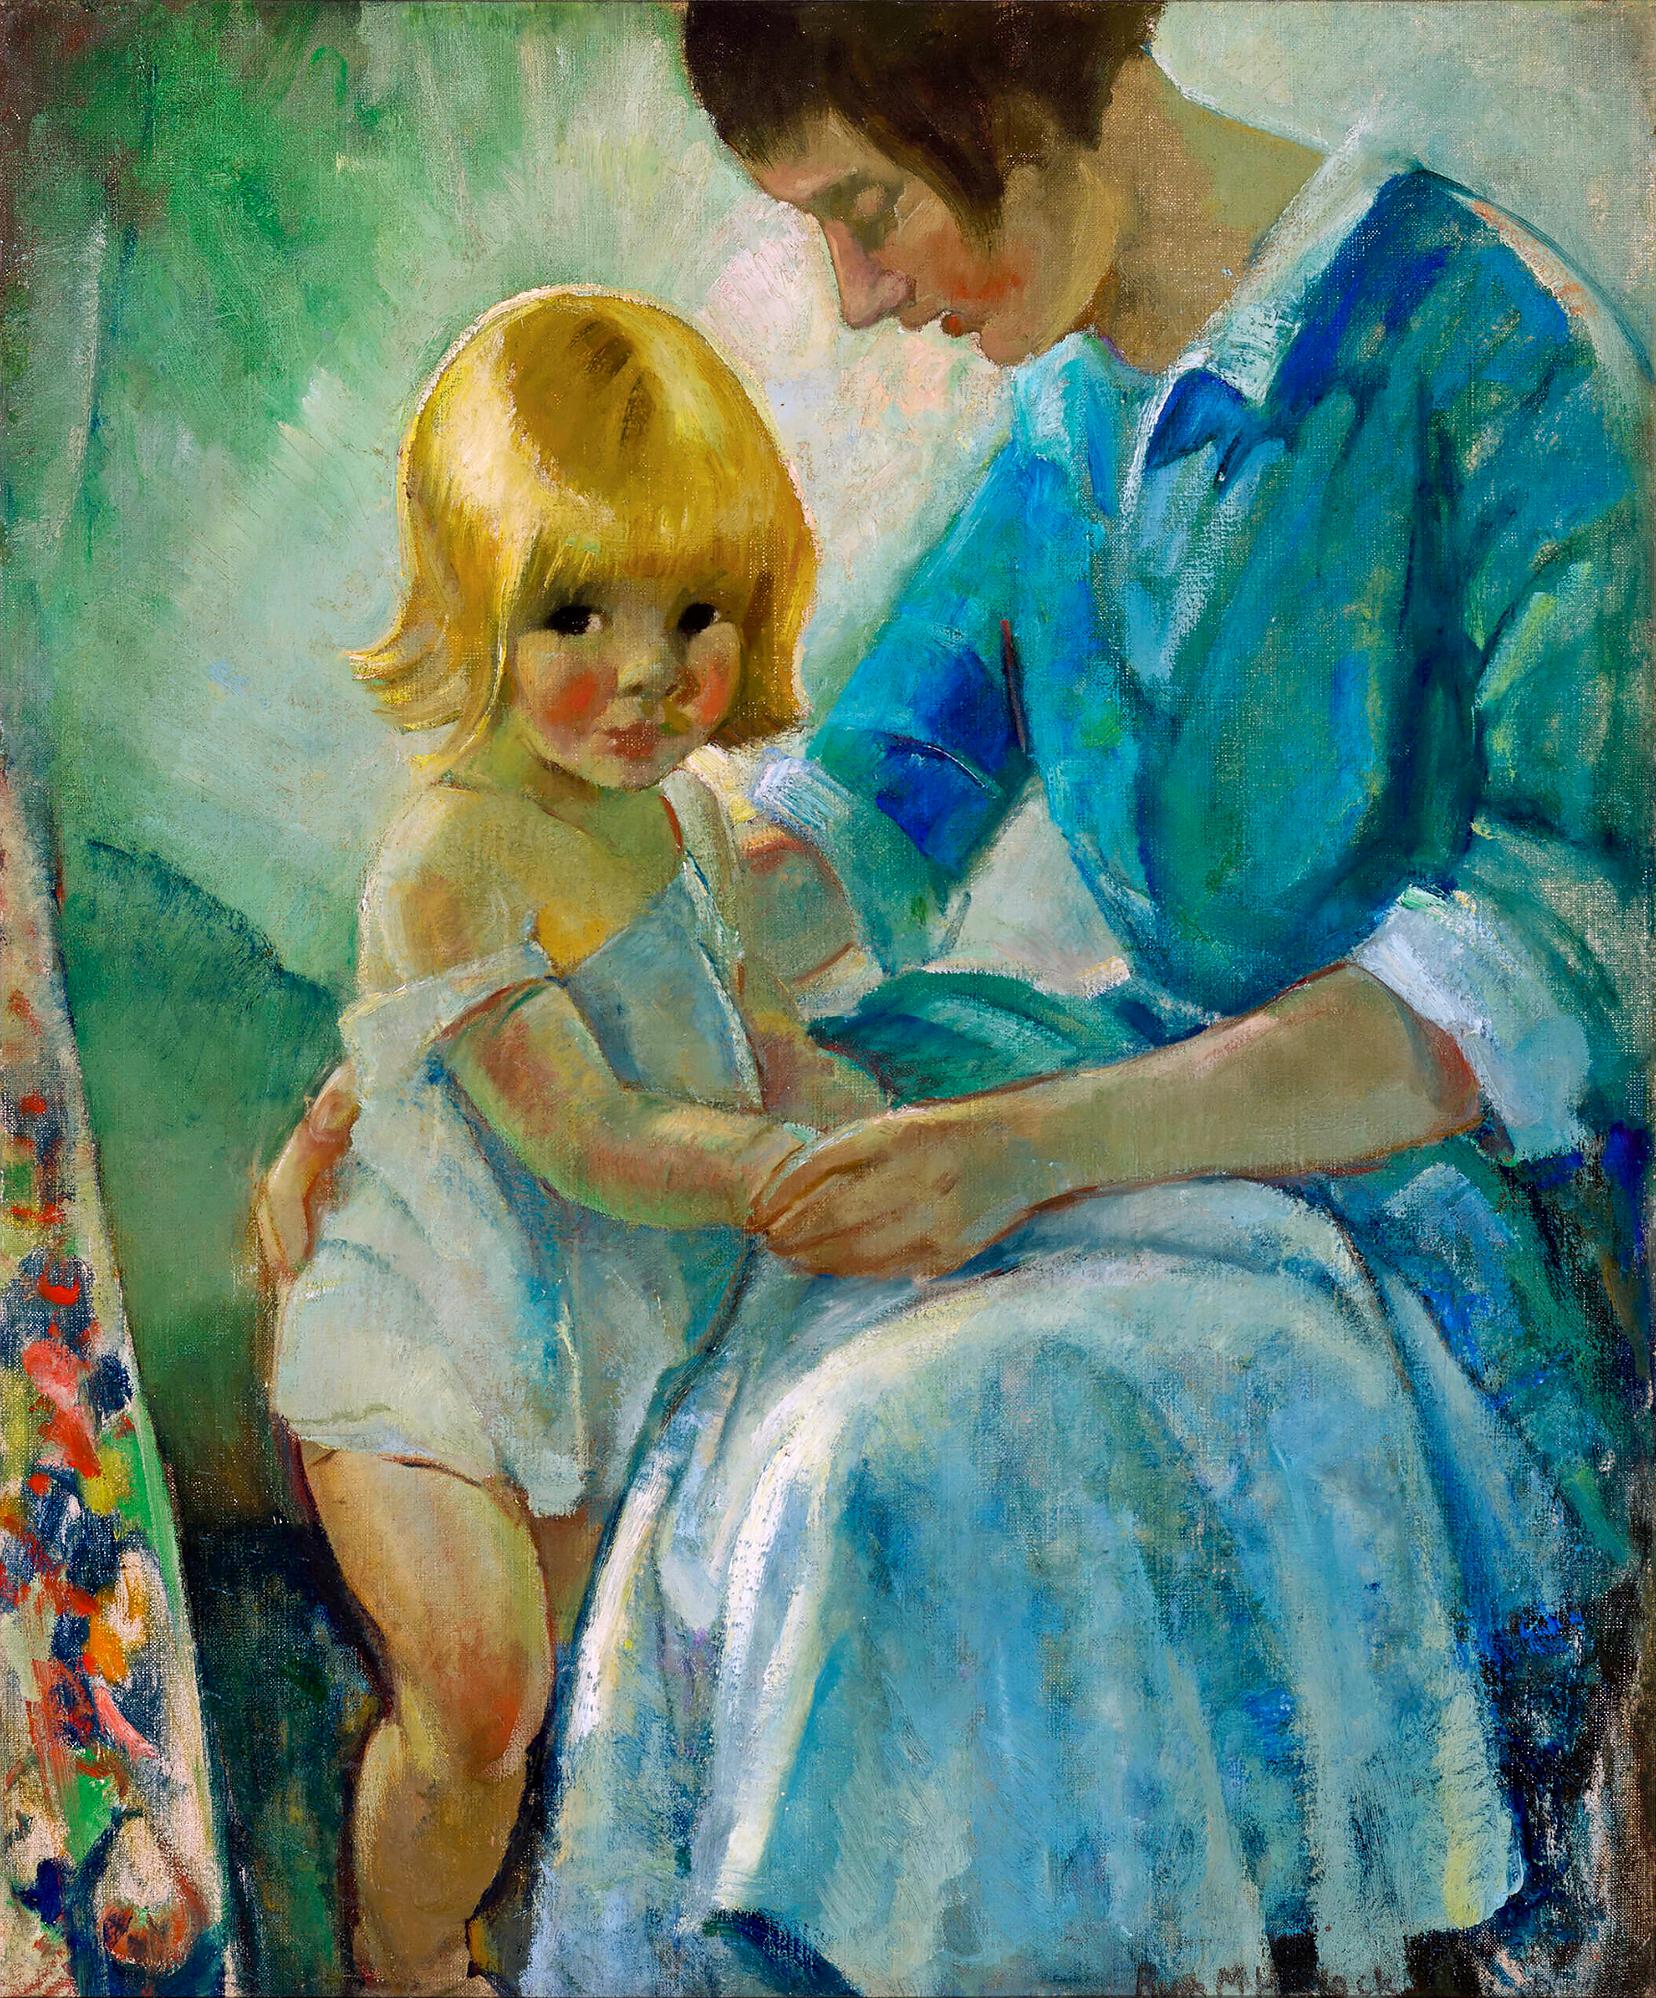 Ruth Mary Hallock Figurative Painting - Mother and Child in  Tender Moment - Female Illustrator Golden Age